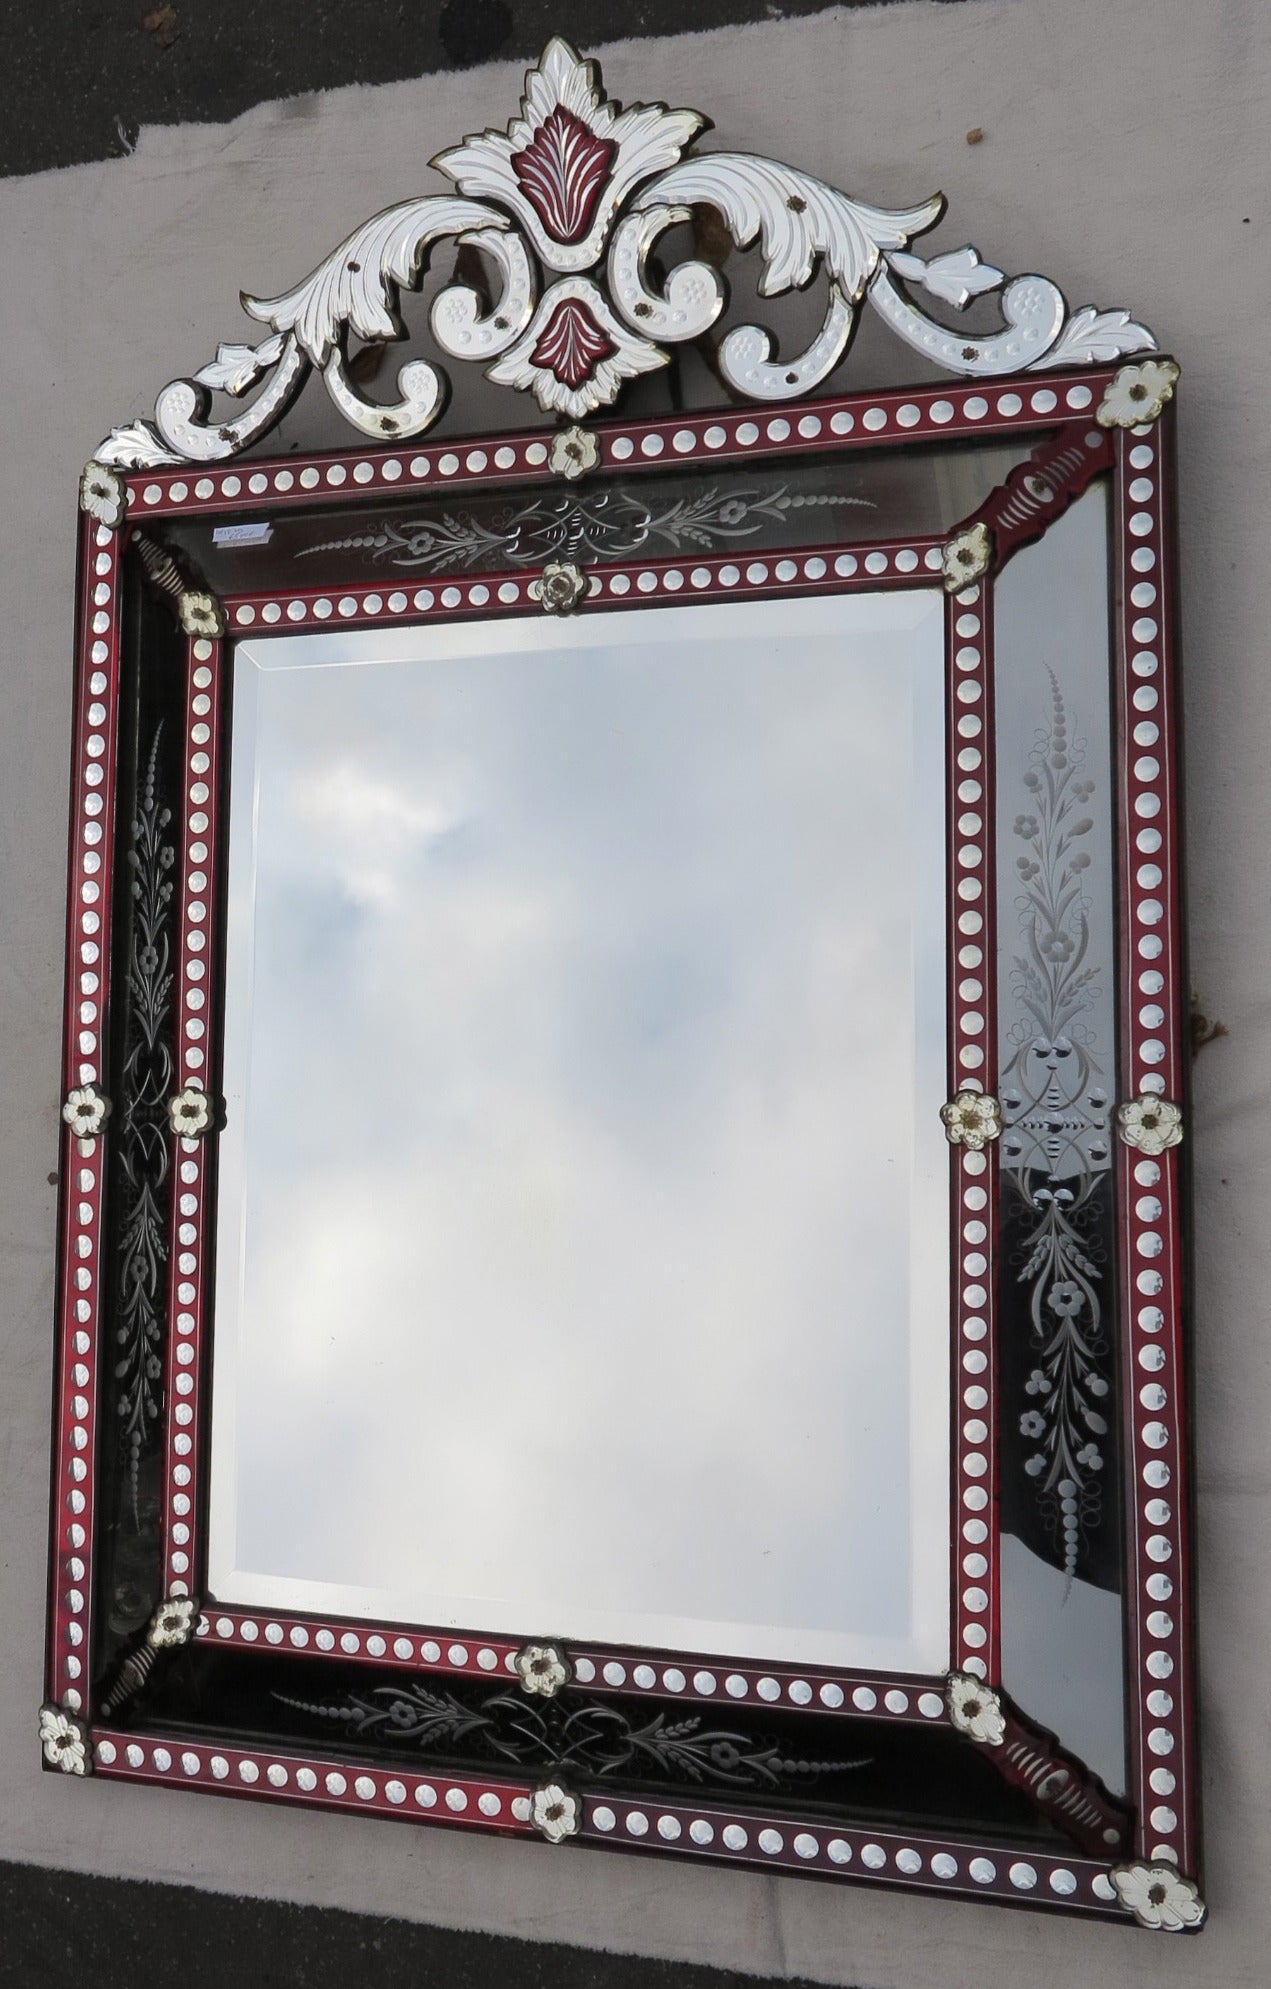 Mirror has front wall covered with crystal or glass of Bohéme of dark red color, rooms are cut and silvered, good condition, circa 1880/1900